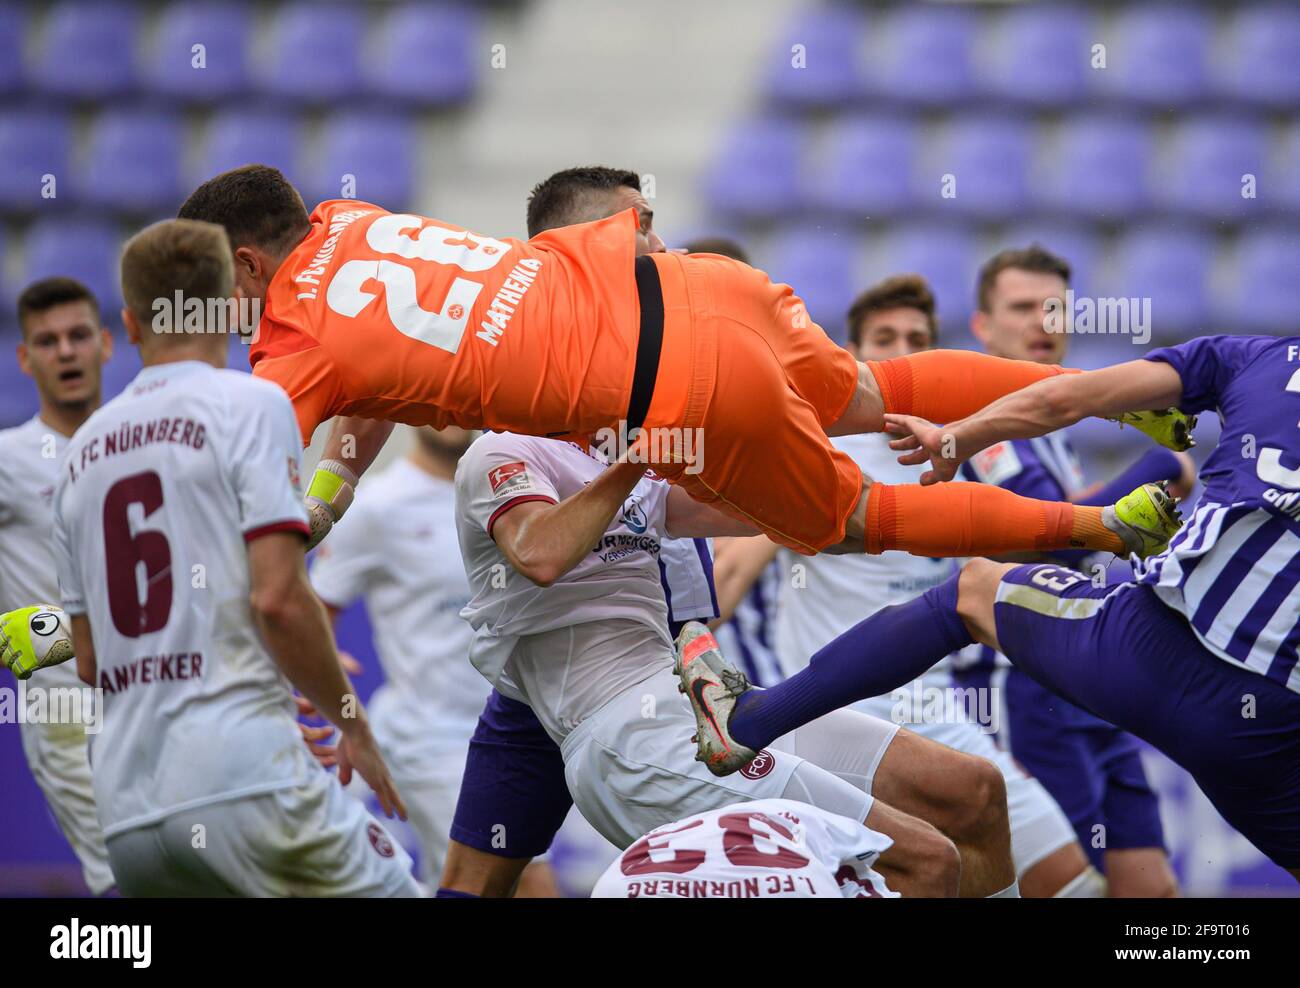 Aue, Germany. 20th Apr, 2021. Football: 2. Bundesliga, FC Erzgebirge Aue - 1. FC Nürnberg, Matchday 30, at Erzgebirgsstadion. Nuremberg's goalkeeper Christian Mathenia (M) jumps for the ball. Credit: Robert Michael/dpa-Zentralbild/dpa - IMPORTANT NOTE: In accordance with the regulations of the DFL Deutsche Fußball Liga and/or the DFB Deutscher Fußball-Bund, it is prohibited to use or have used photographs taken in the stadium and/or of the match in the form of sequence pictures and/or video-like photo series./dpa/Alamy Live News Stock Photo